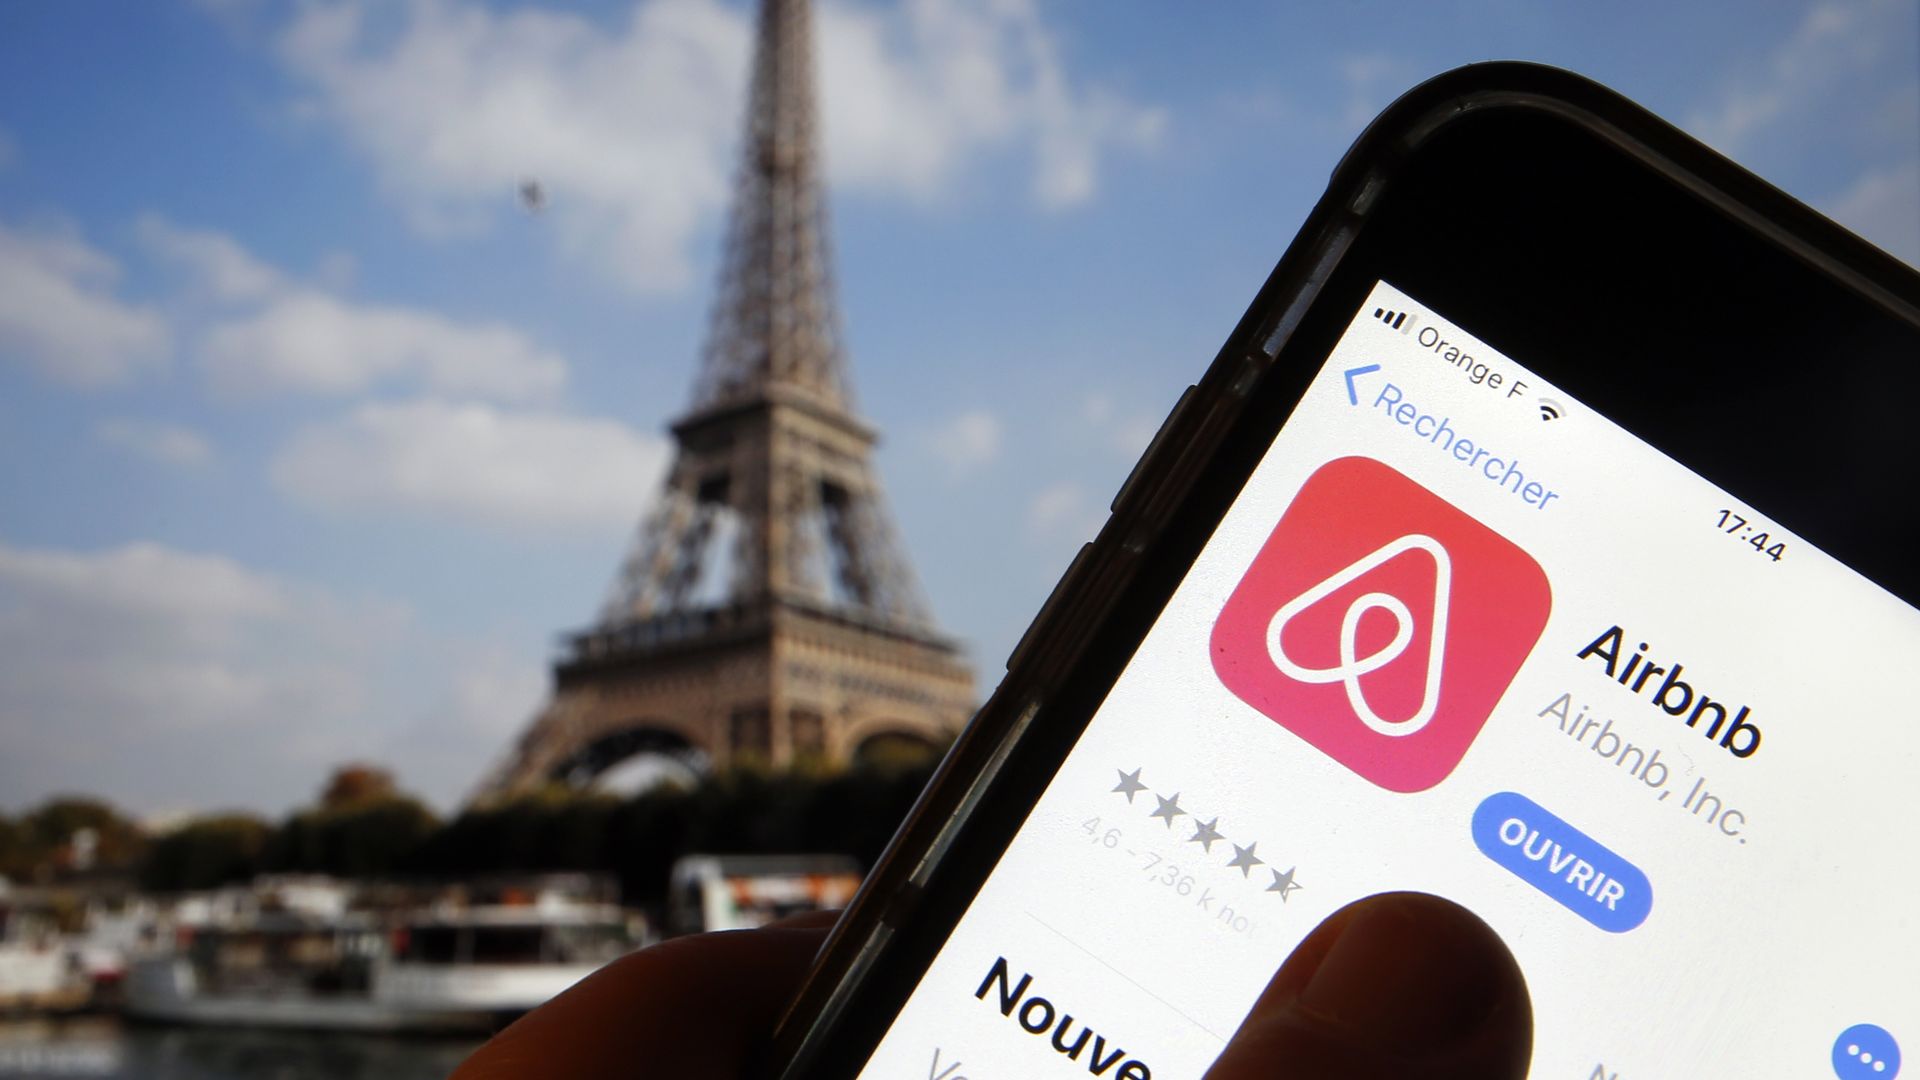 Airbnb app in front of the Eiffel tower